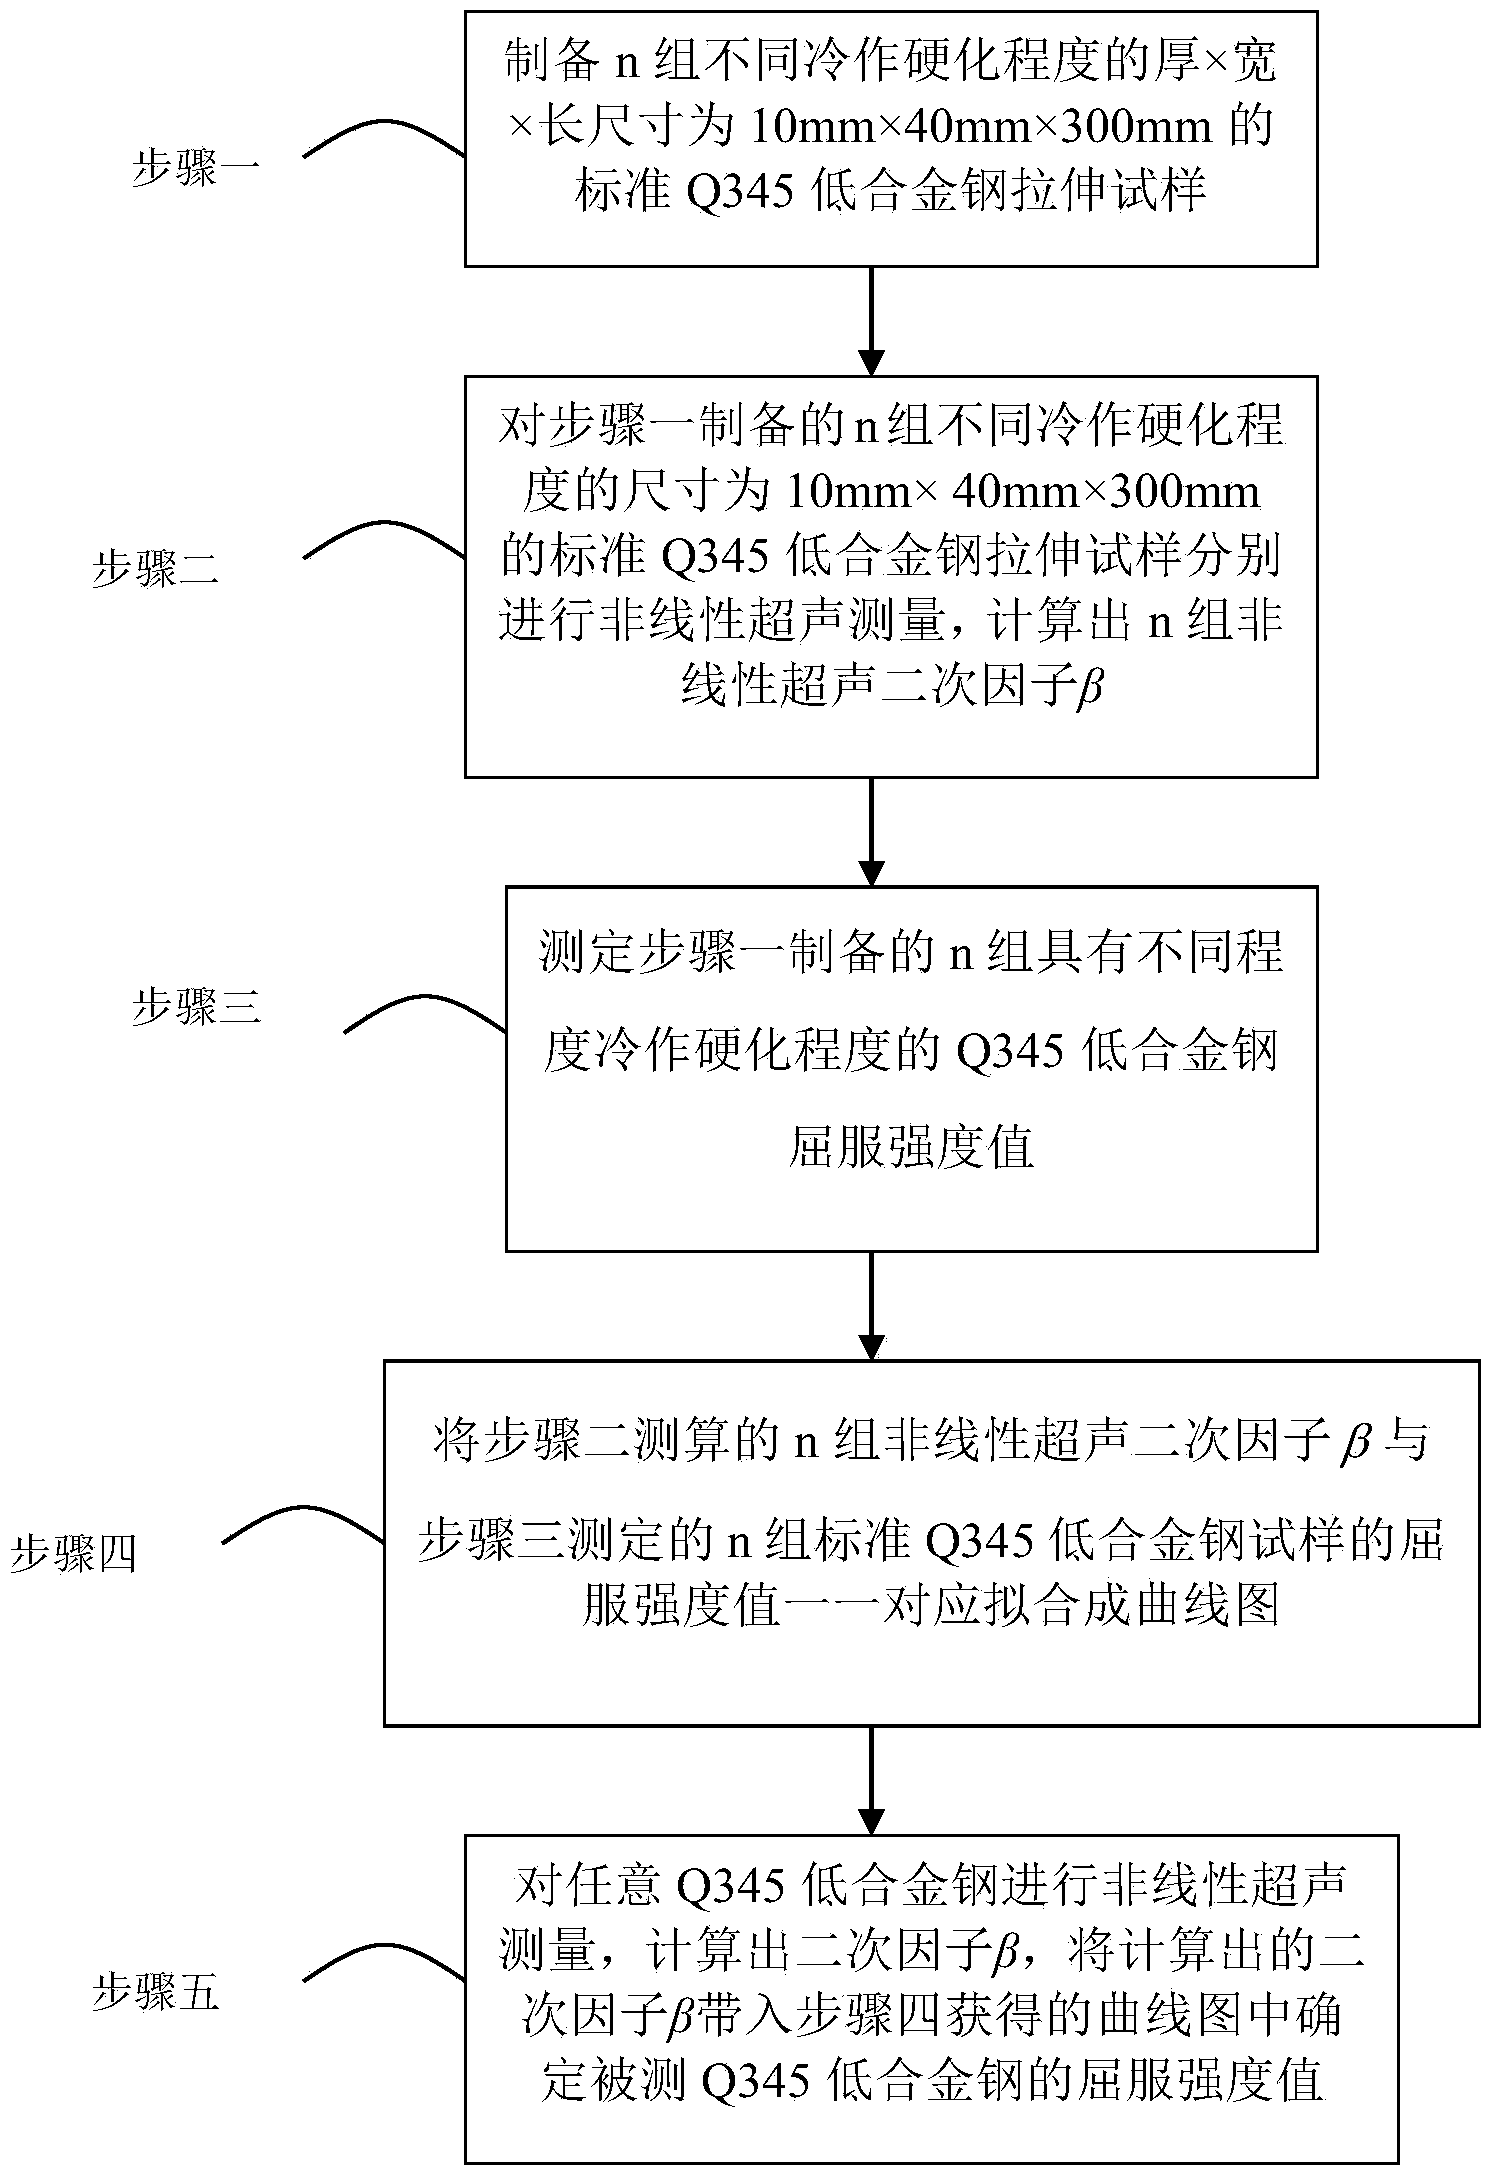 Method for measuring yield strength of Q345 low alloy steel by using nonlinear ultrasonic technique